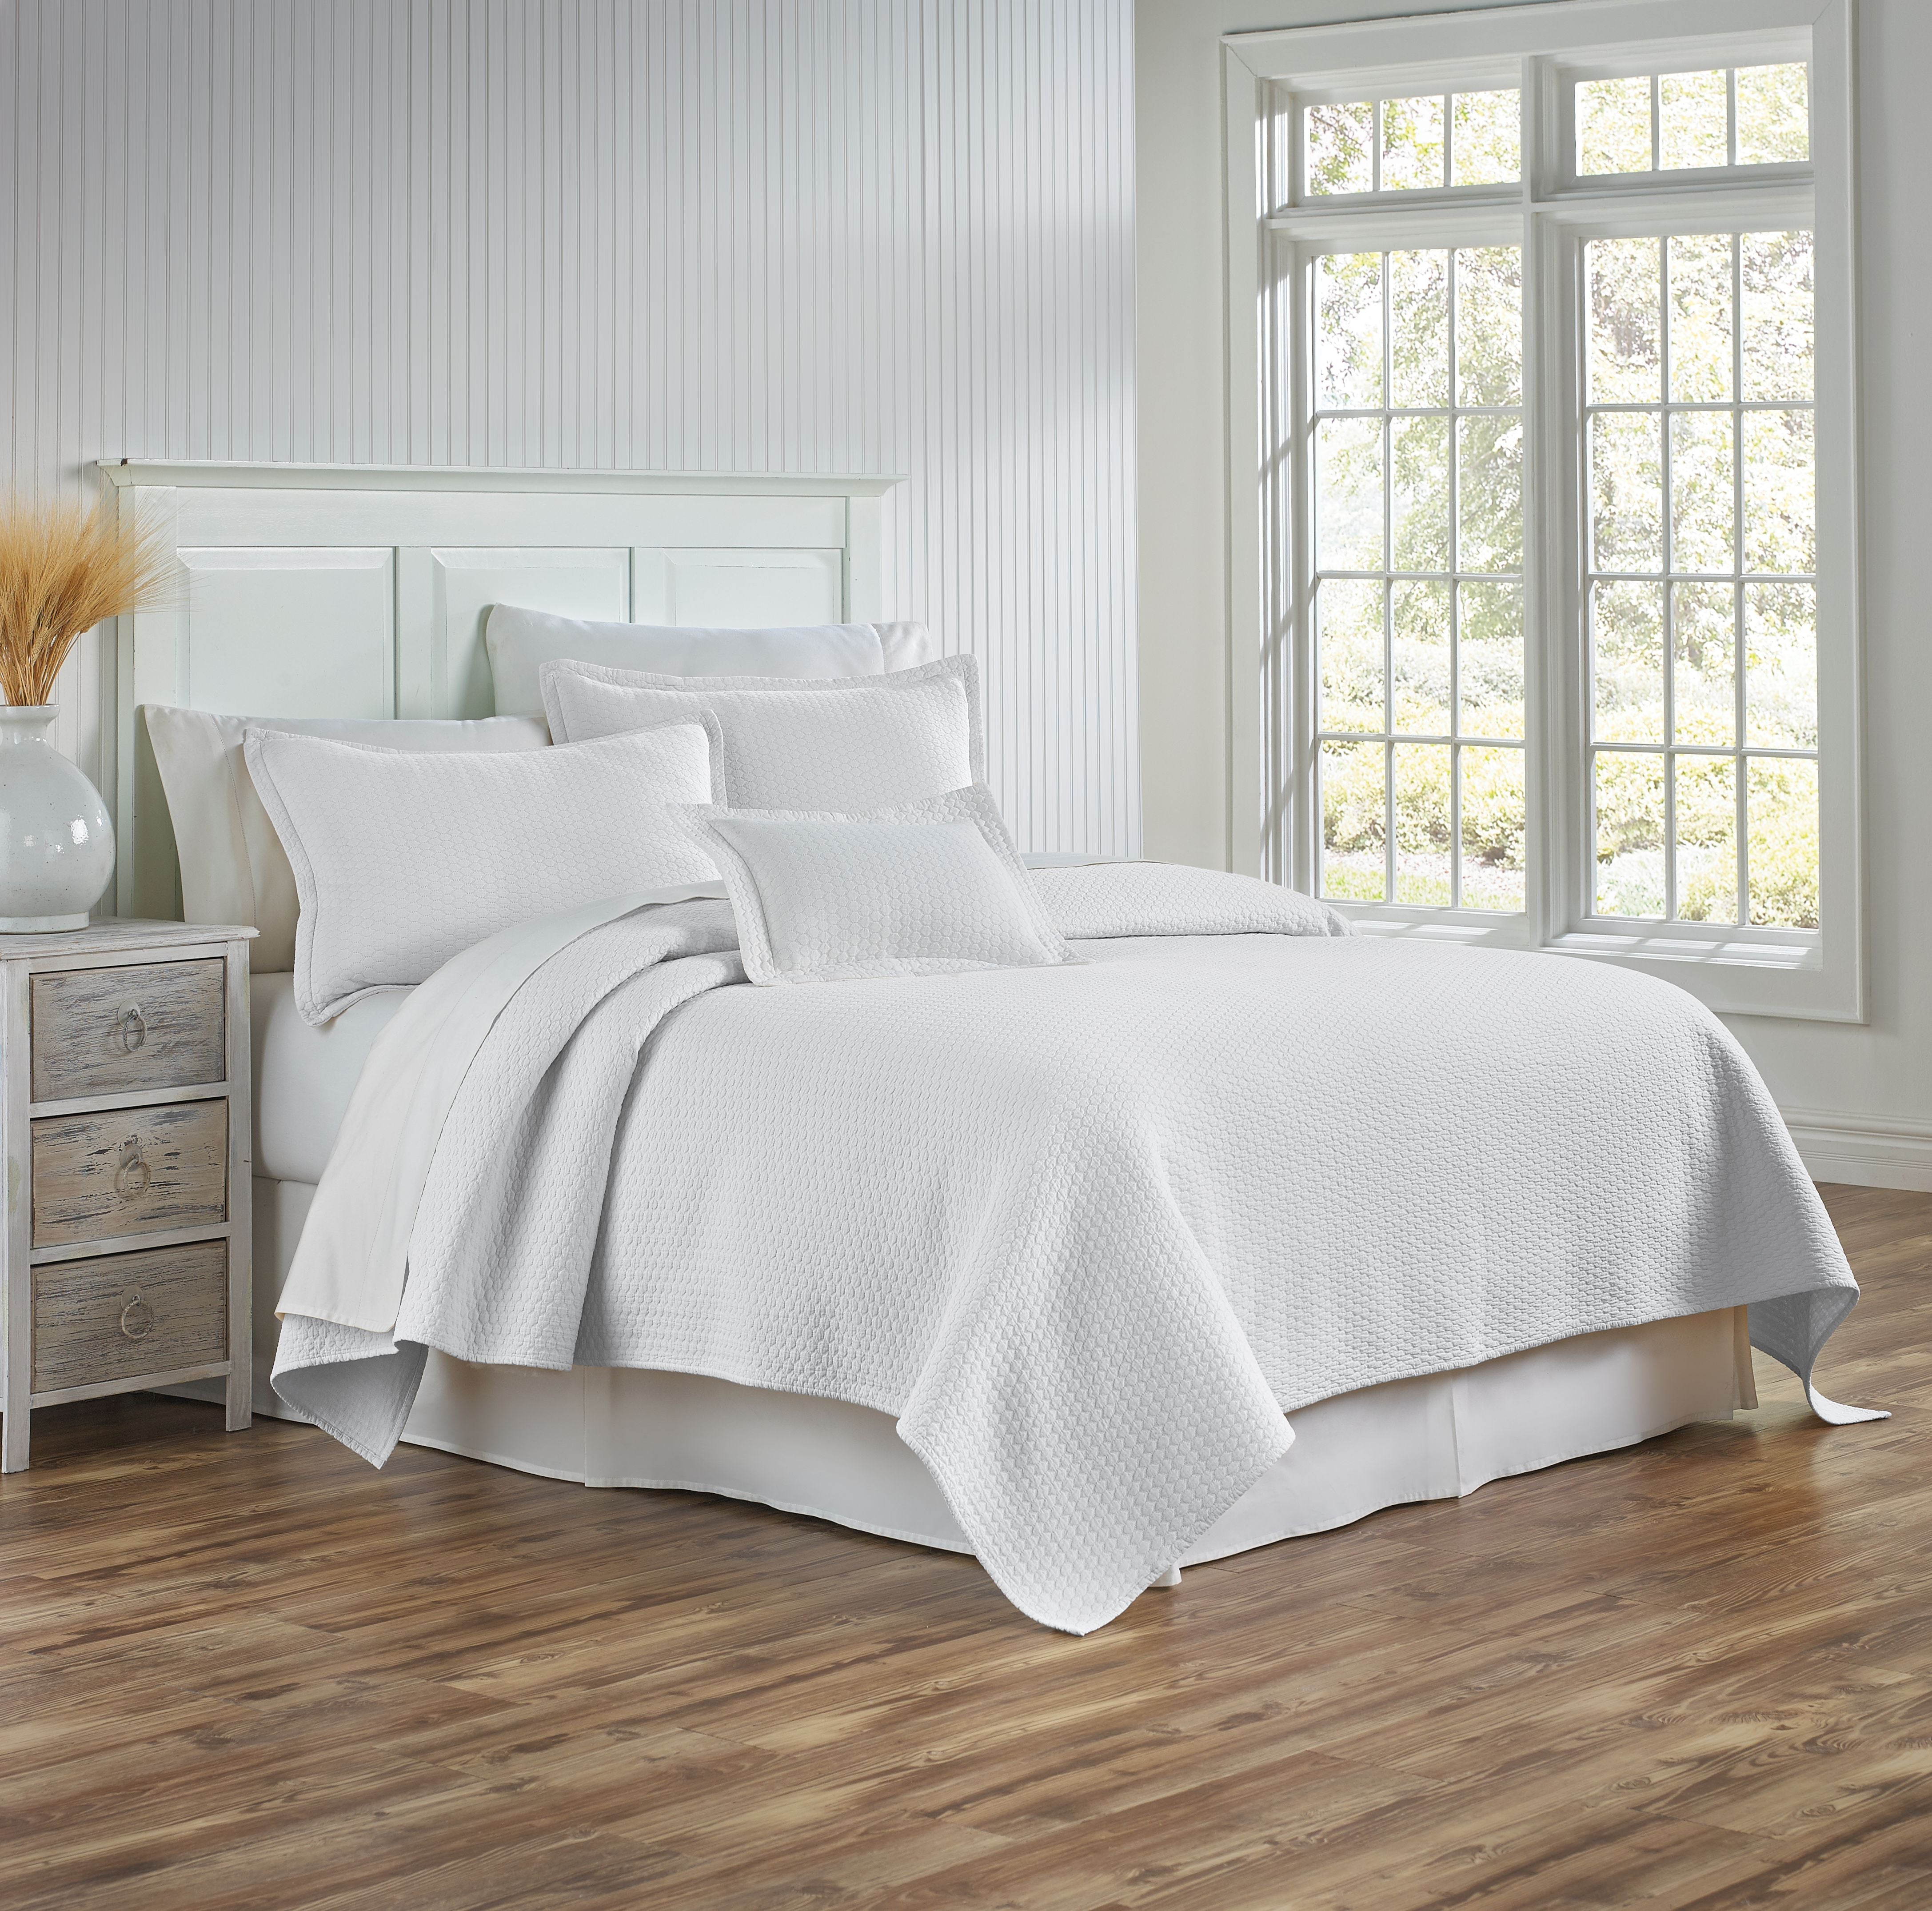 Tracey Queen Coverlet - White